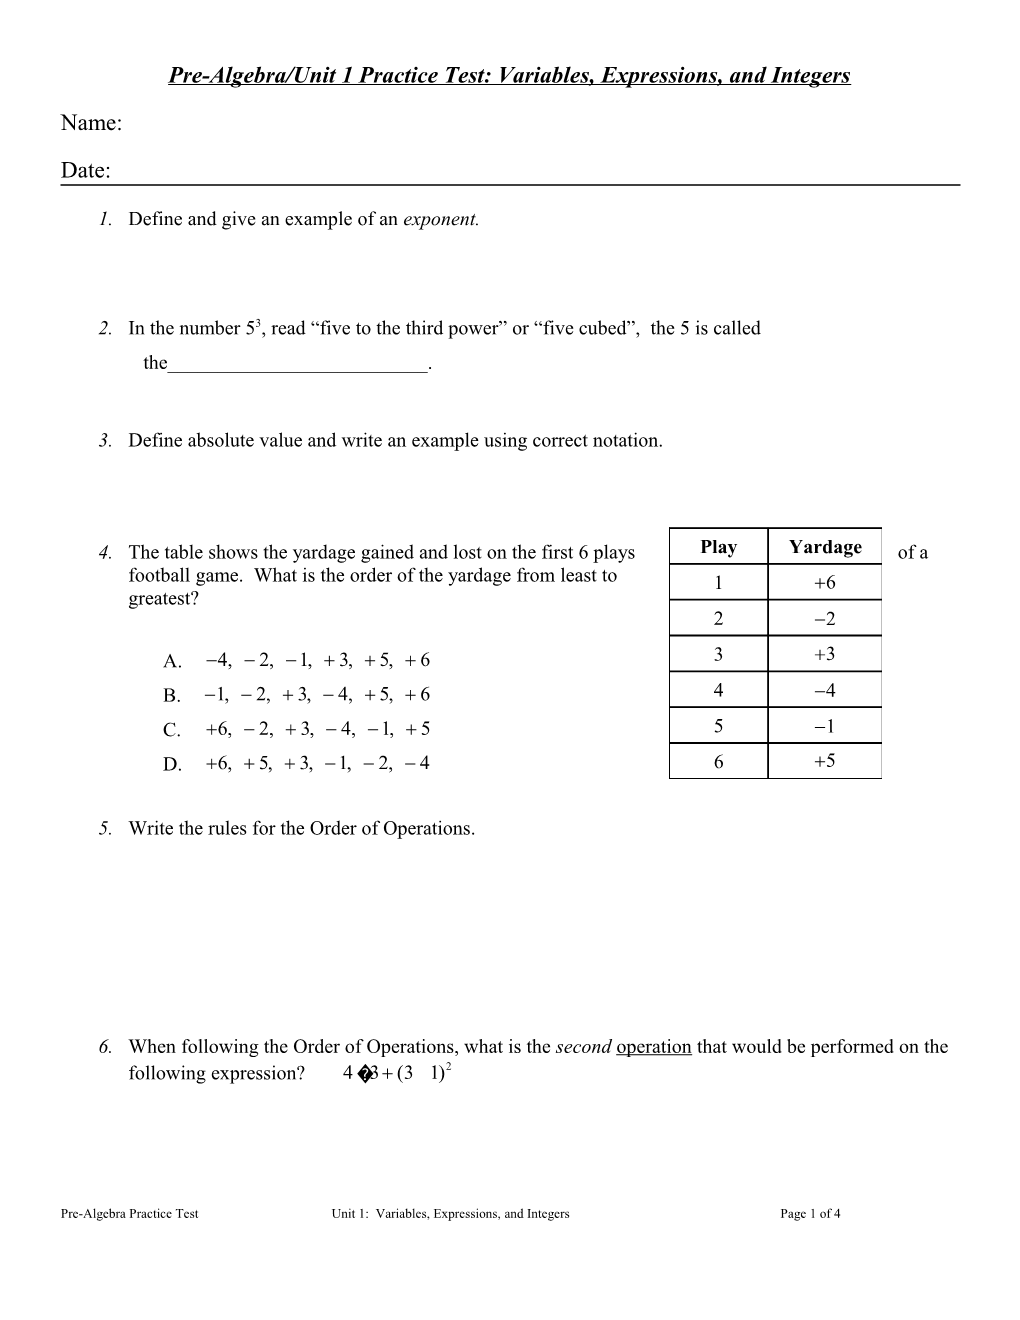 Pre-Algebra/Unit 1 Practice Test: Variables, Expressions, and Integers